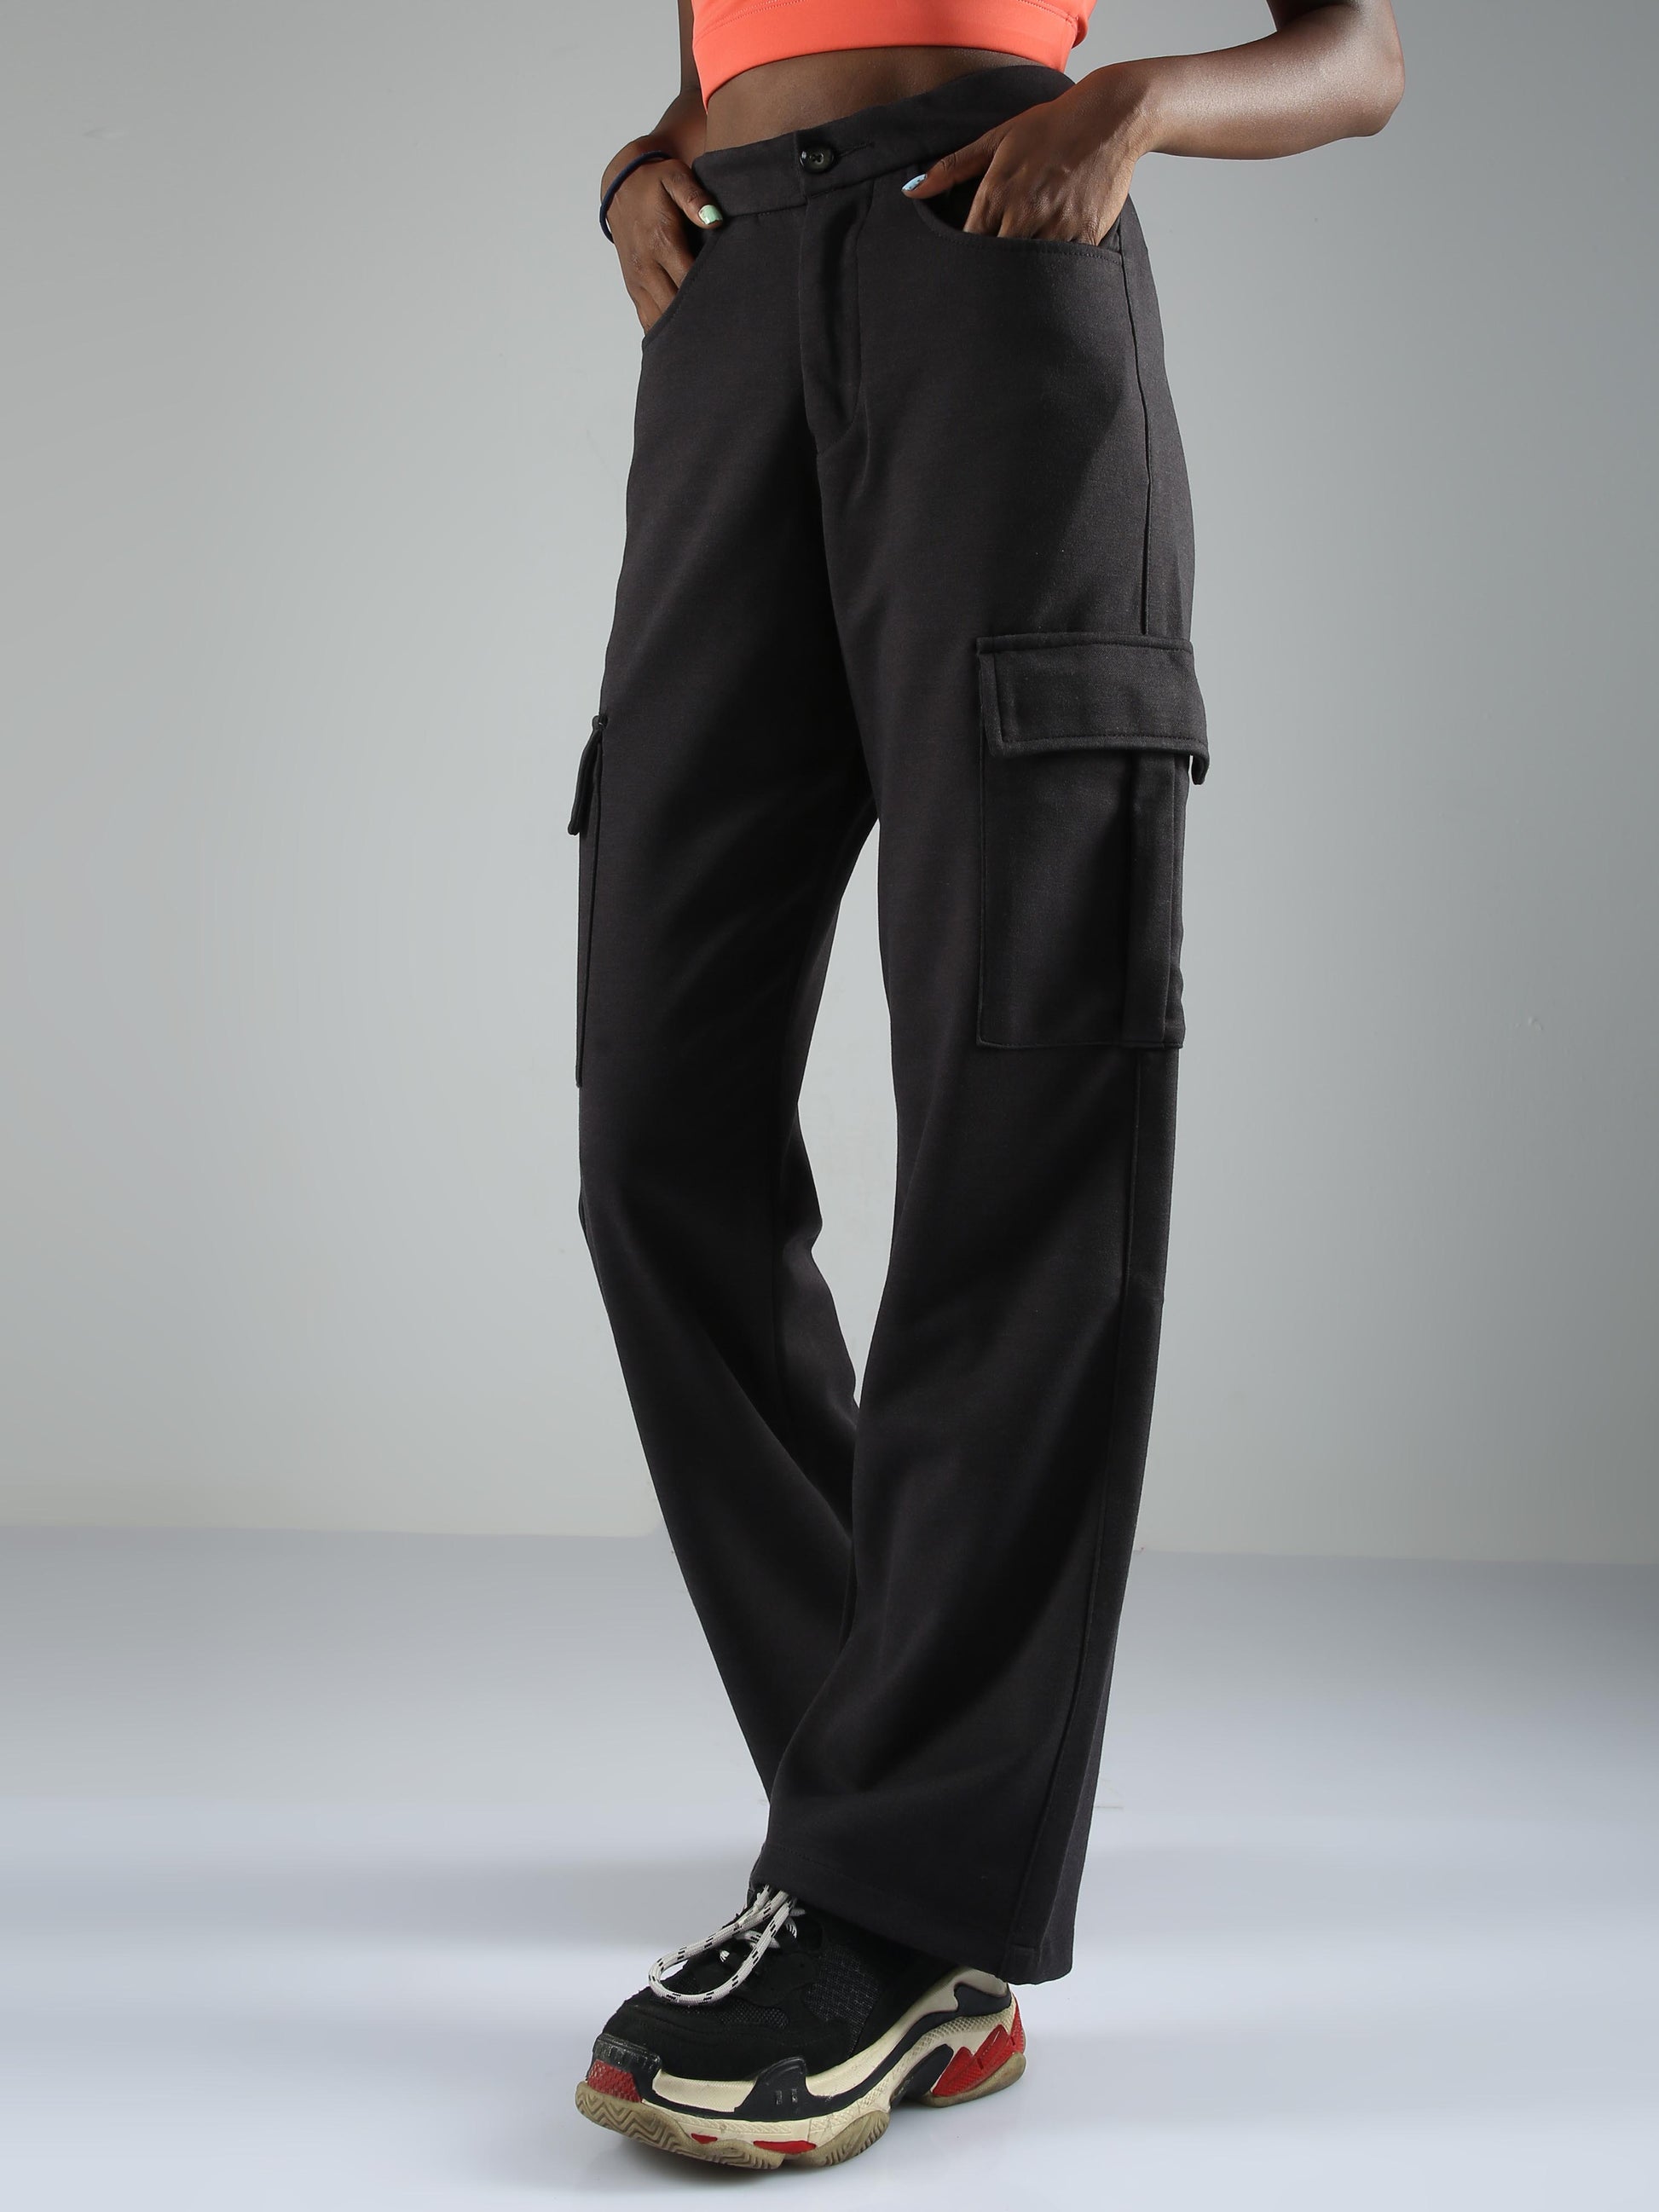 Buy latest cool and comfortable black straight pants online